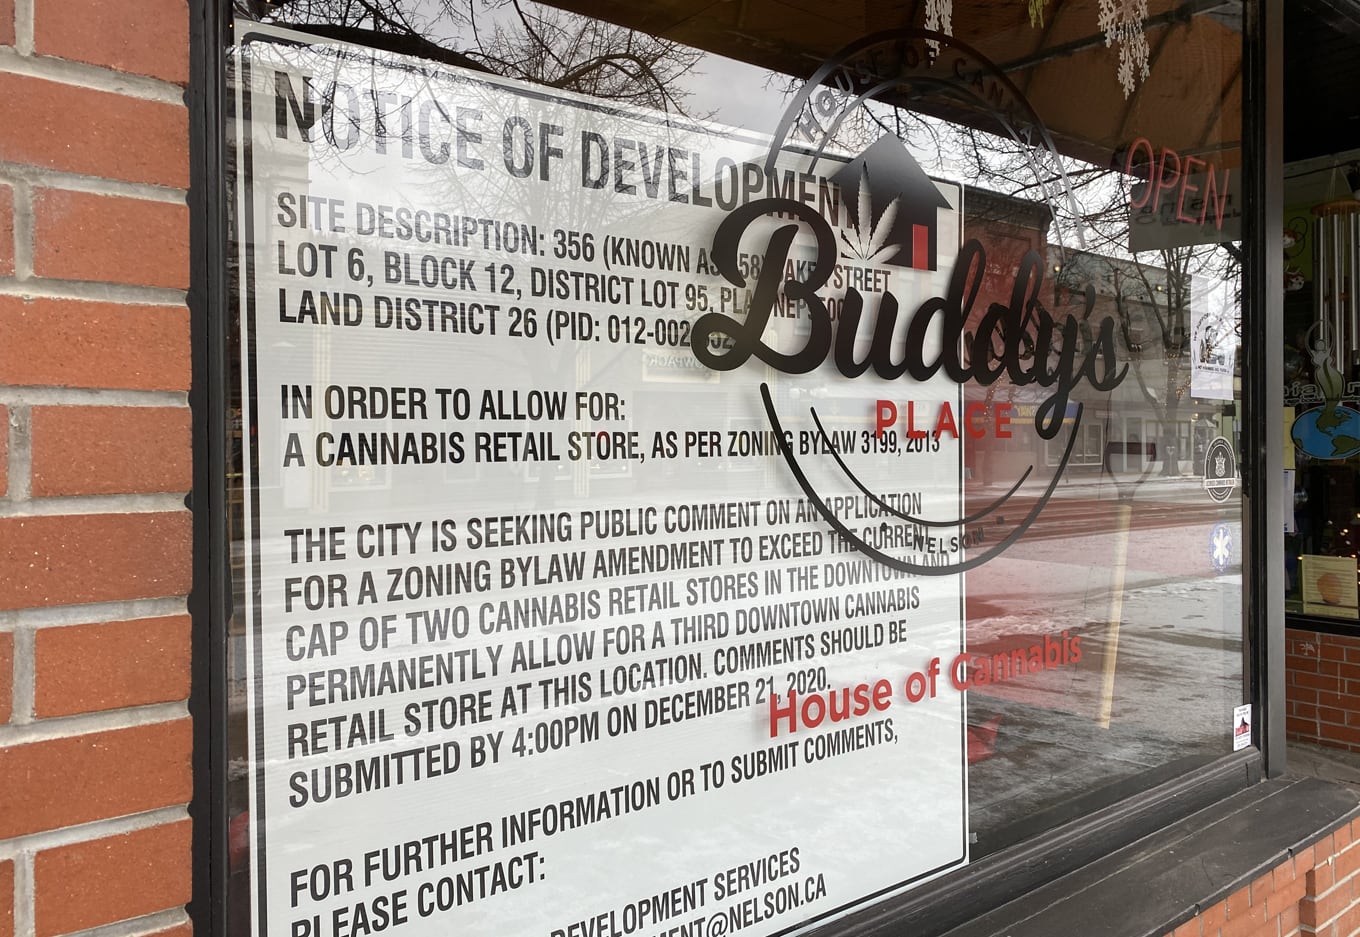 Process to approve third cannabis retail store in downtown moves to public stage